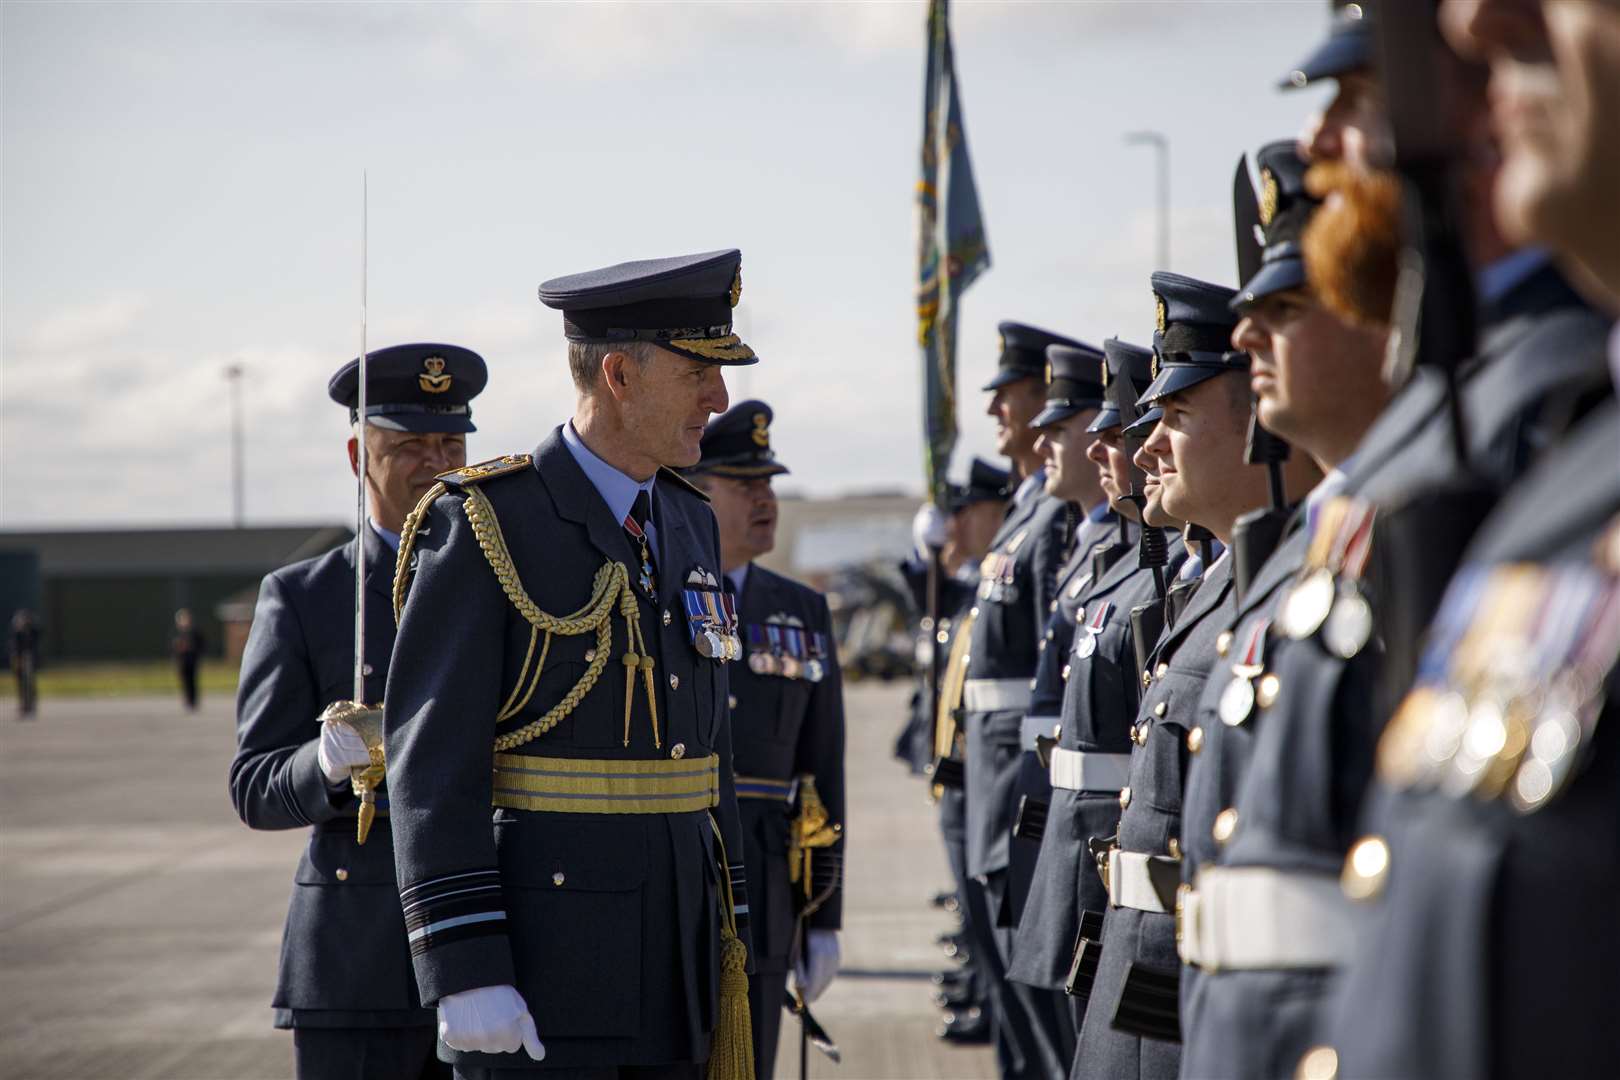 Deputy Commander Operations (DCom Ops), Air Marshal Gerry Mayhew inspects the parade of 120 Squadron, accompanied by the Station Commander of RAF Lossiemouth, Group Captain Chris Layden, and the Officer Commanding 120 Squadron, Wing Commander James Hanson.